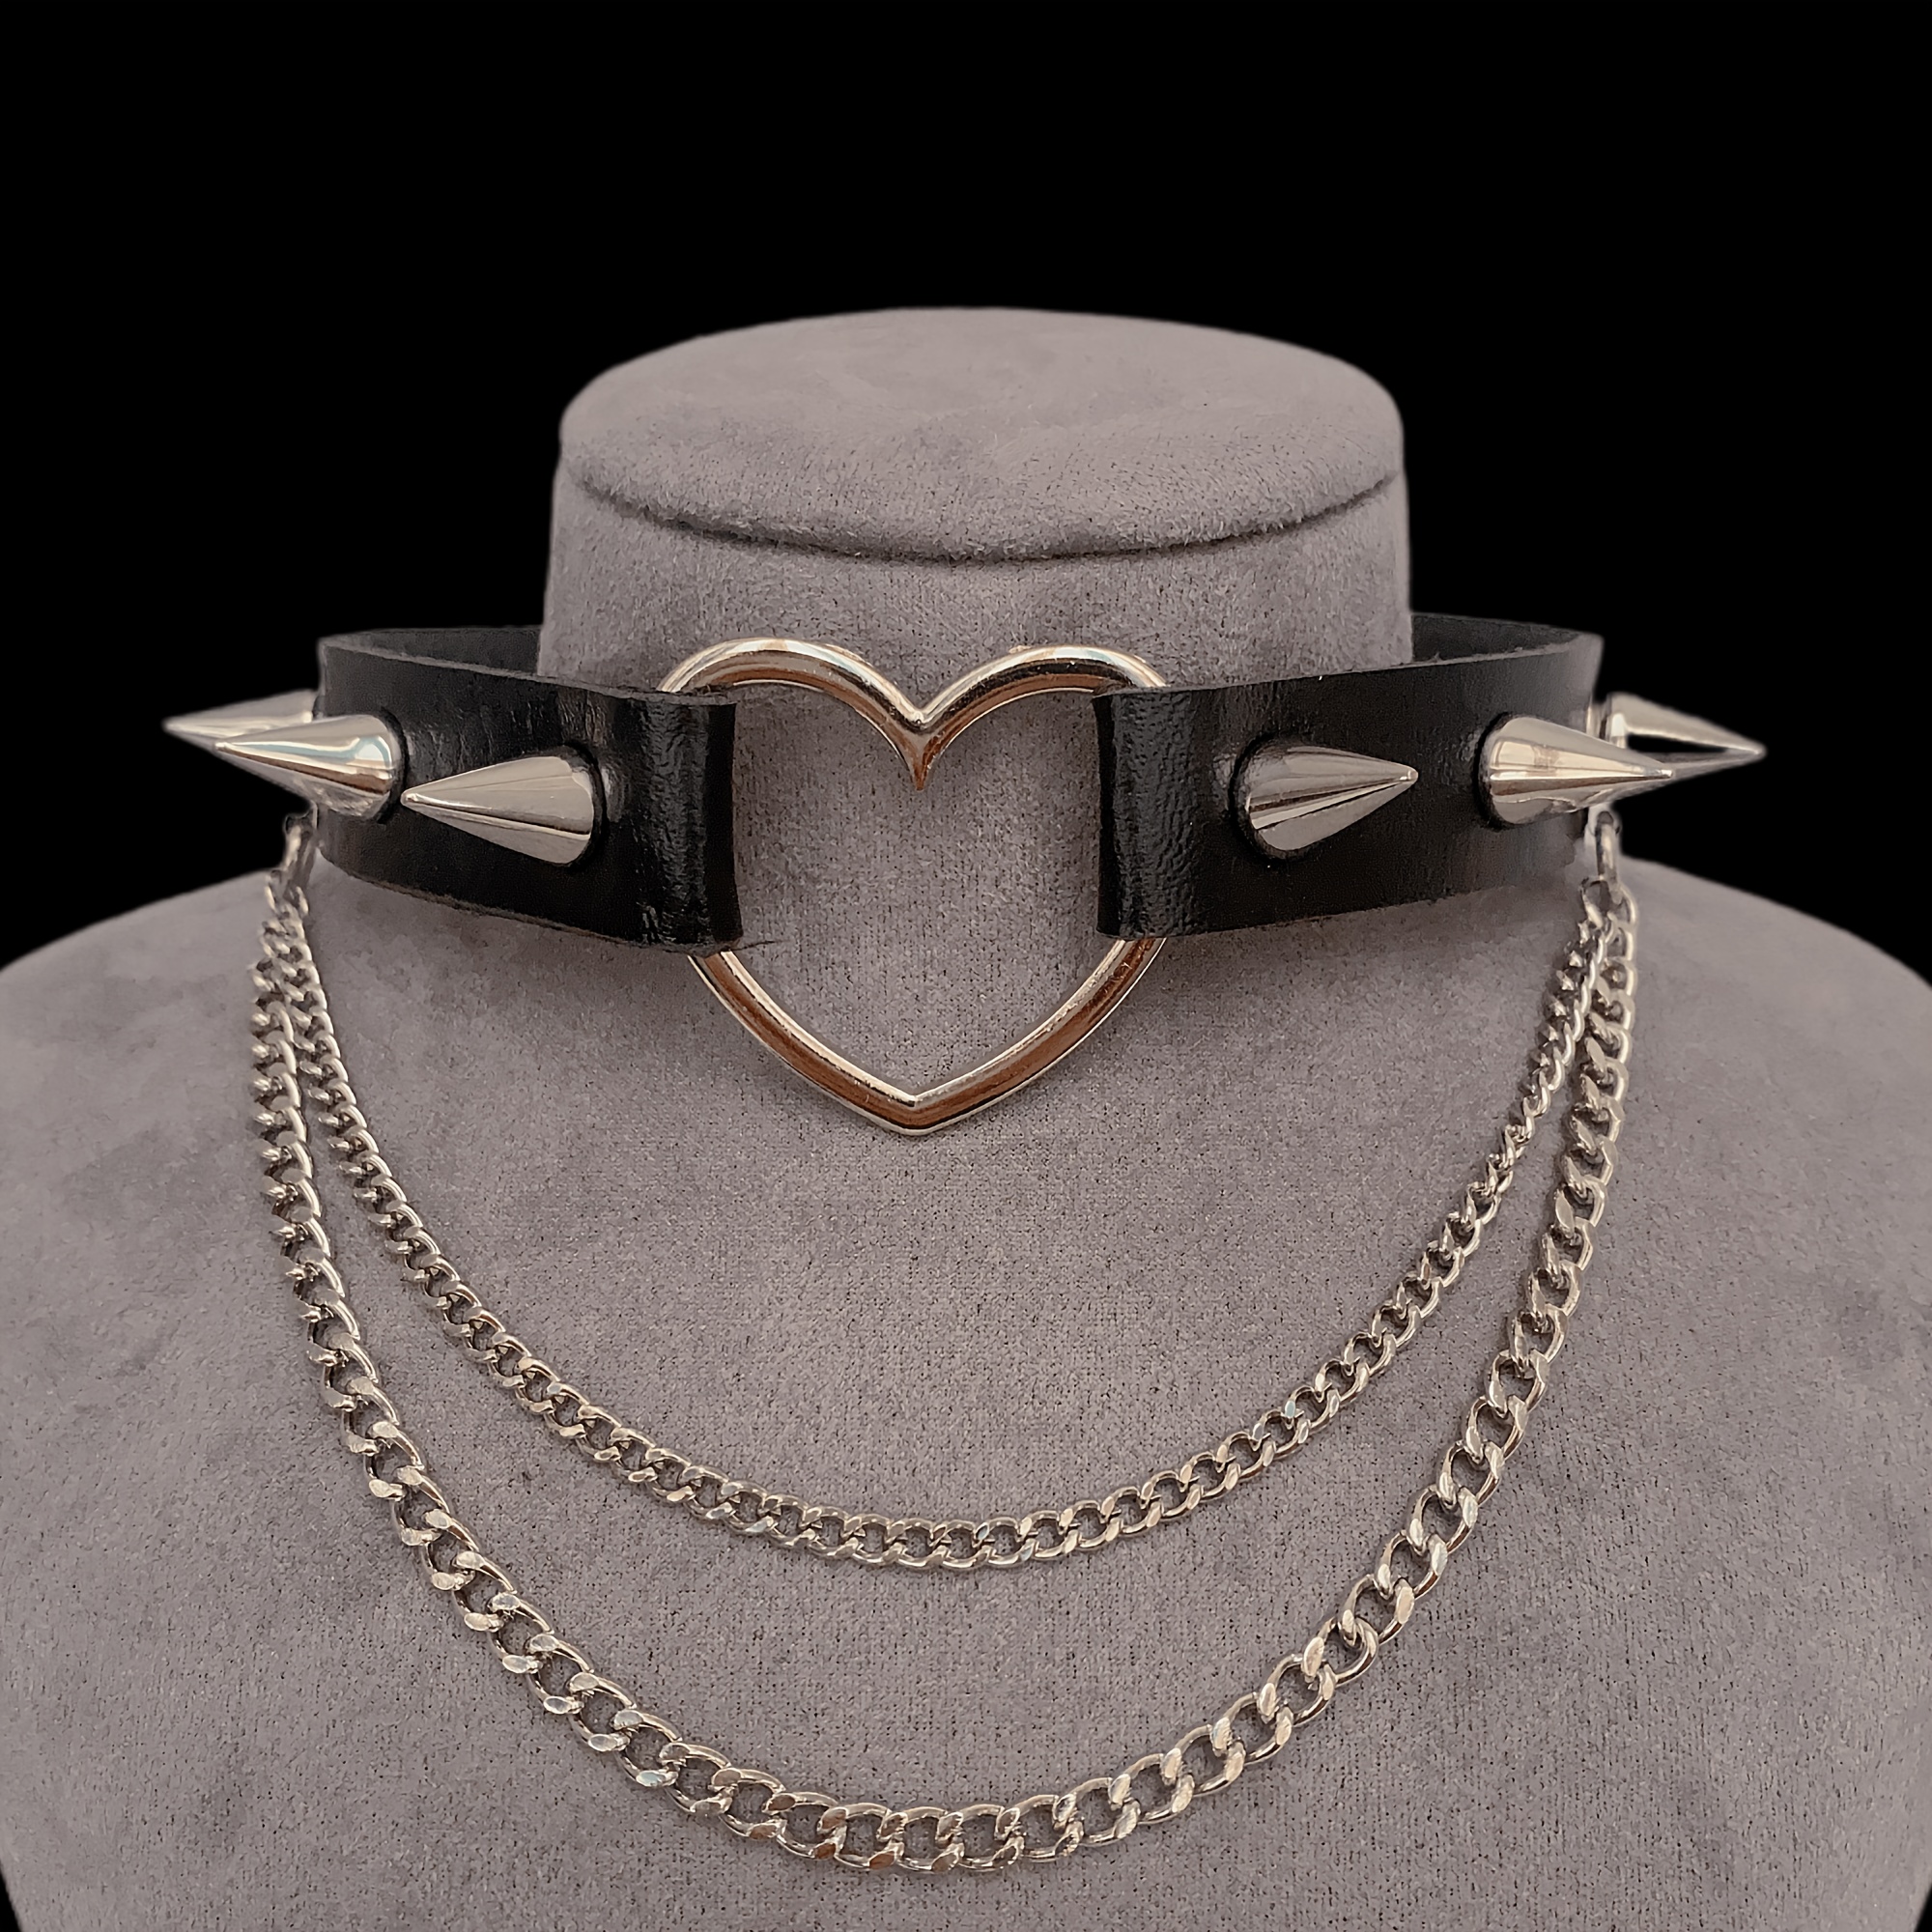 Gothic PU Leather Choker Necklace for Women Men Girls Boys - Punk Rock  Choker O Ring Chain Necklace for Halloween Party Costume